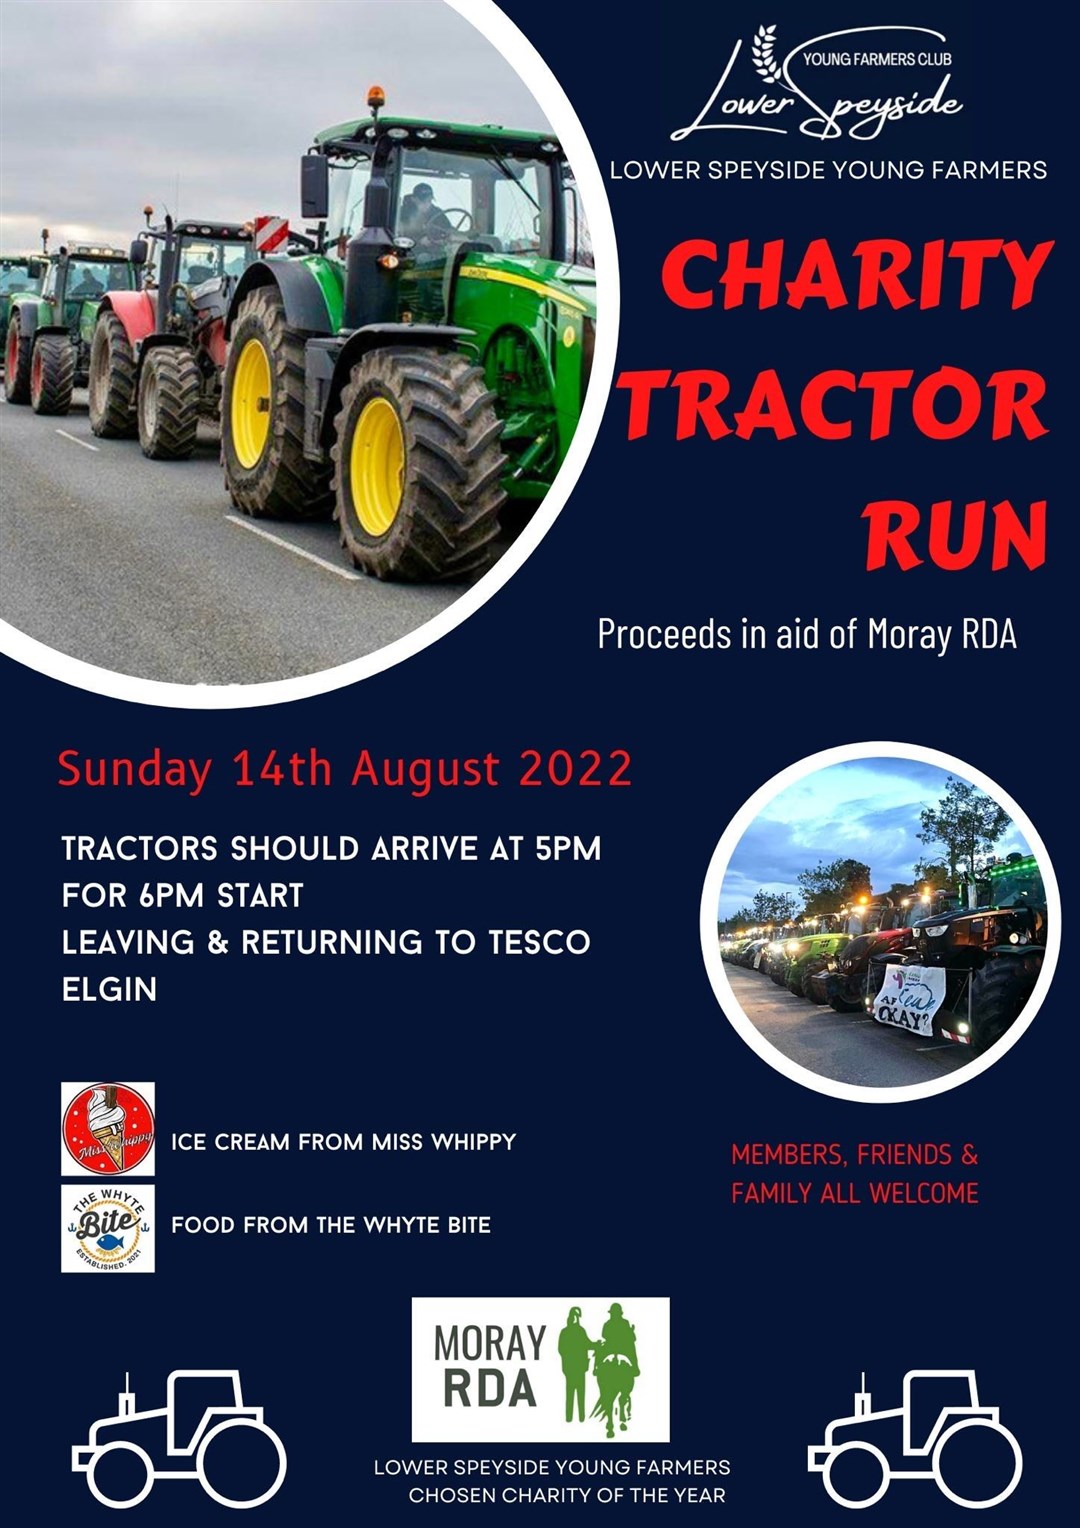 The charity tractor run is set to take place on Sunday, August 14.